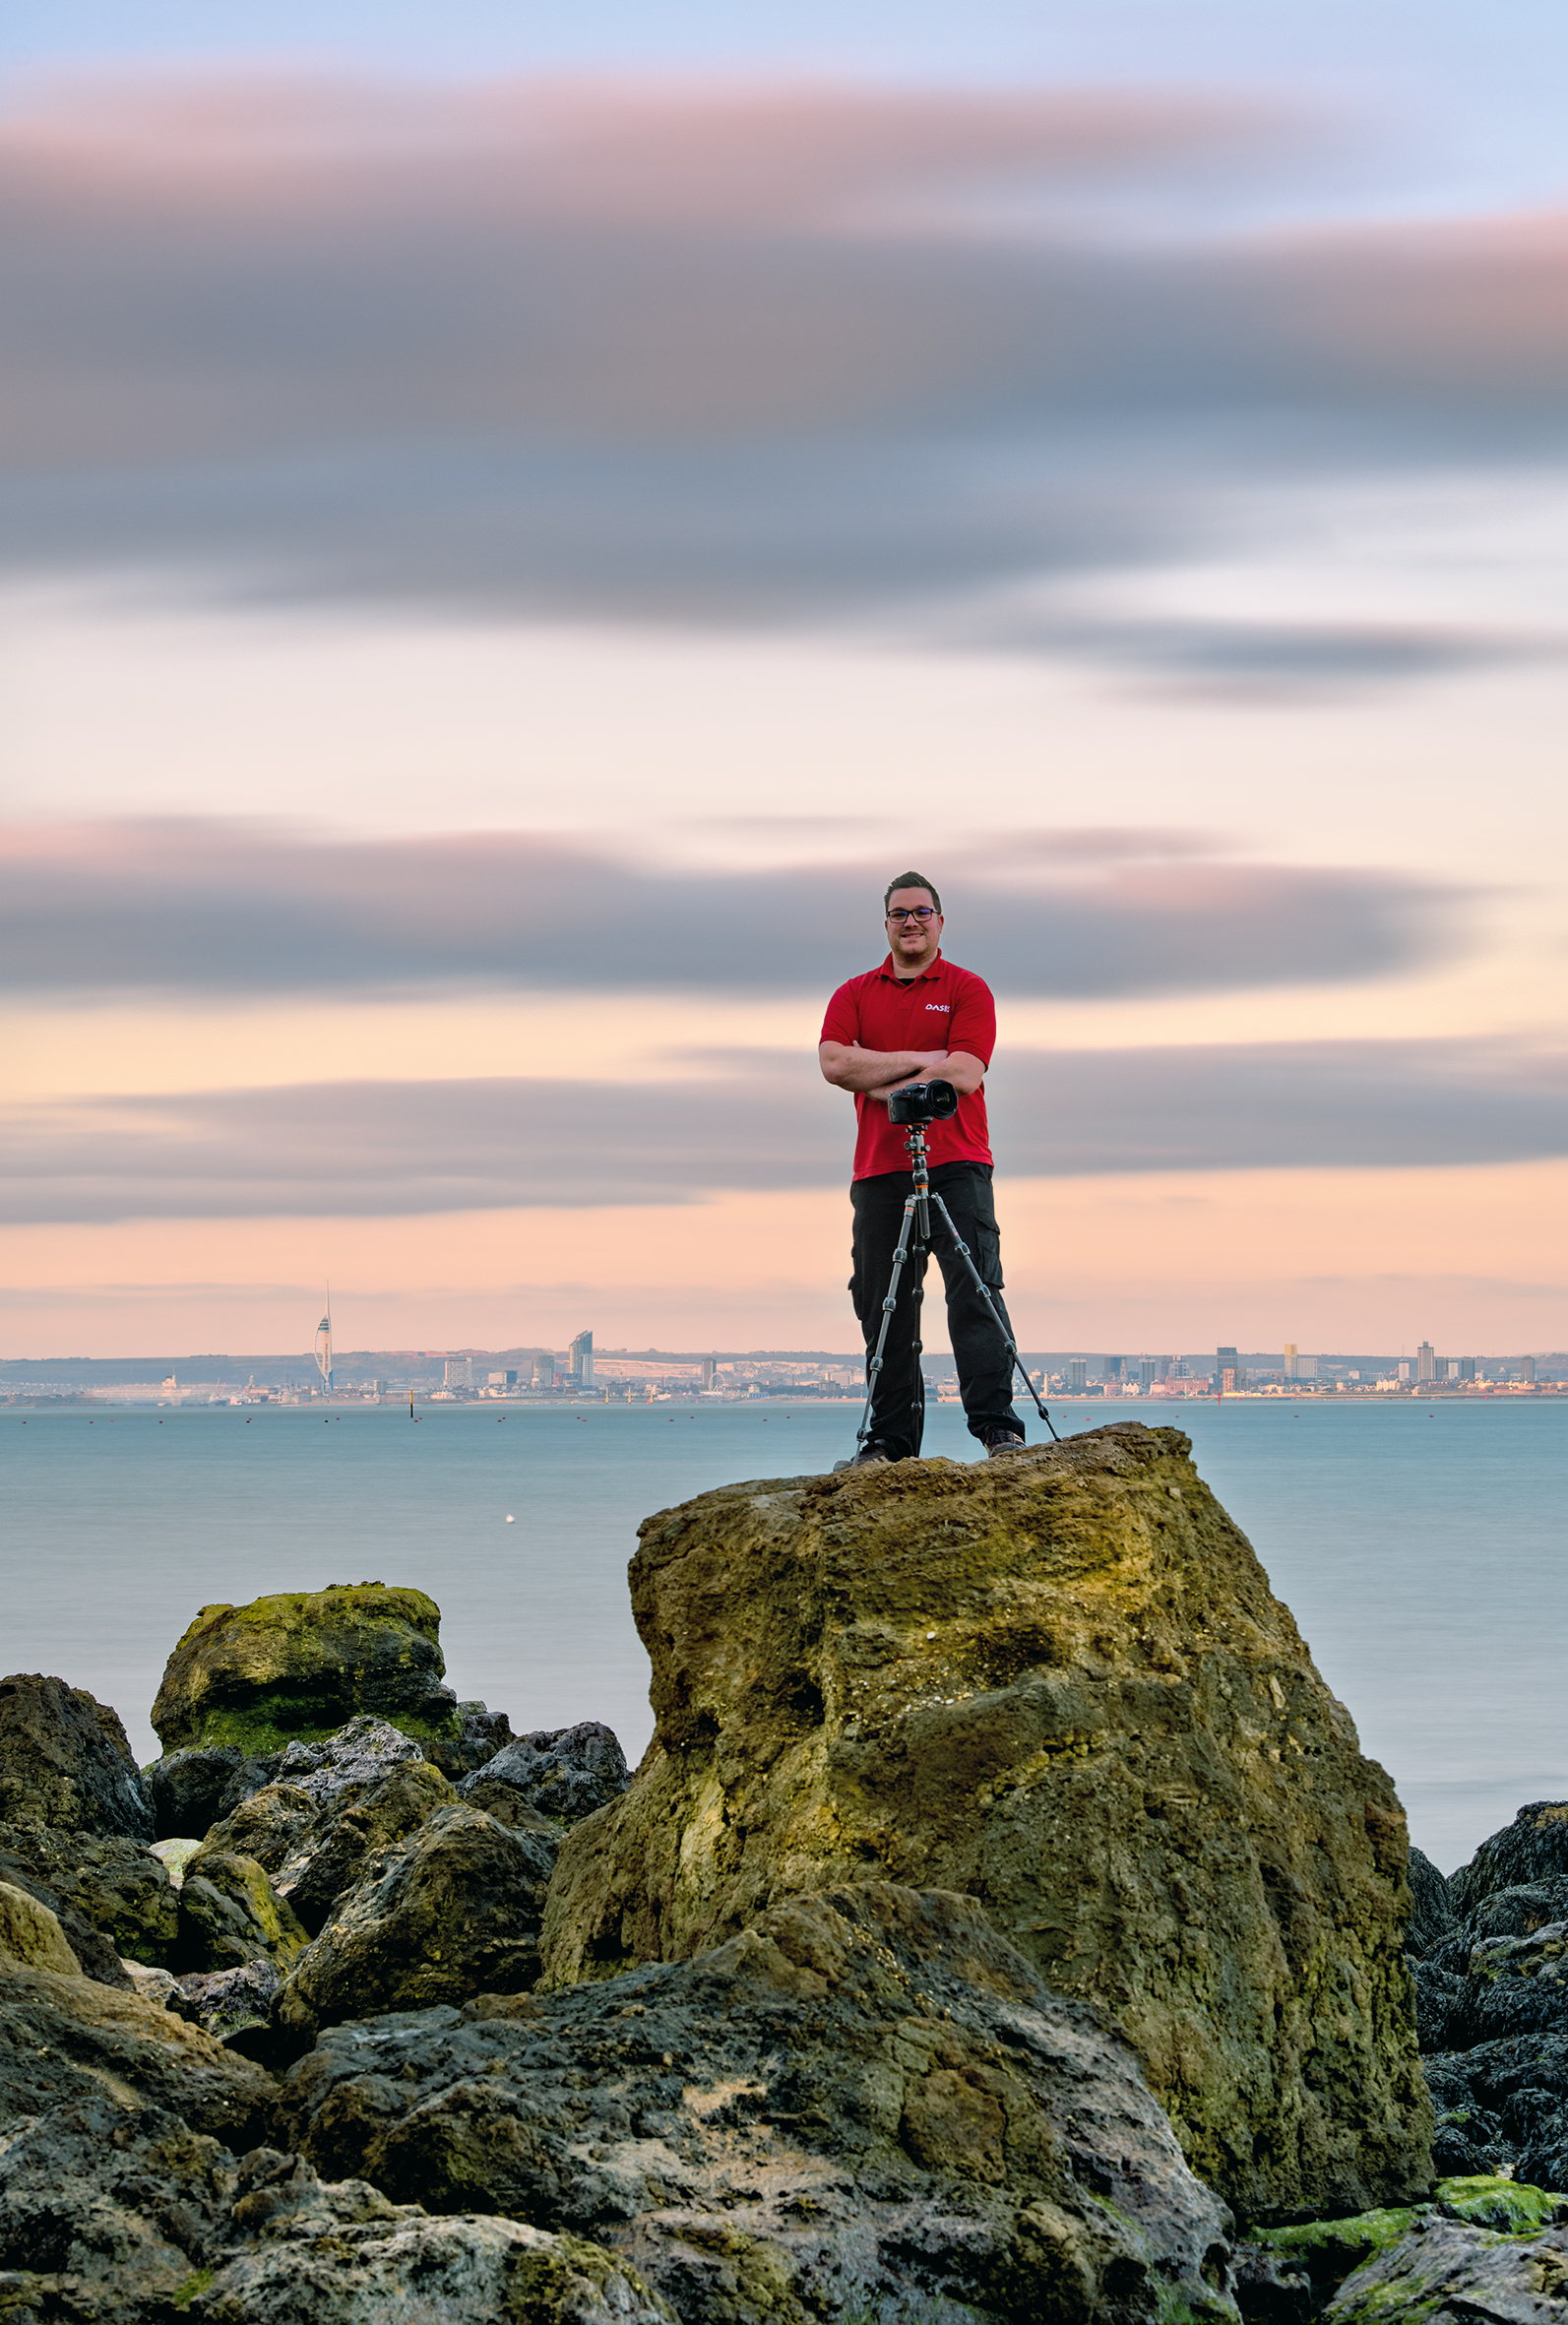 Isle of Wight Photographer Neil Southwell stands on a rock with his camera at Seagrove Bay